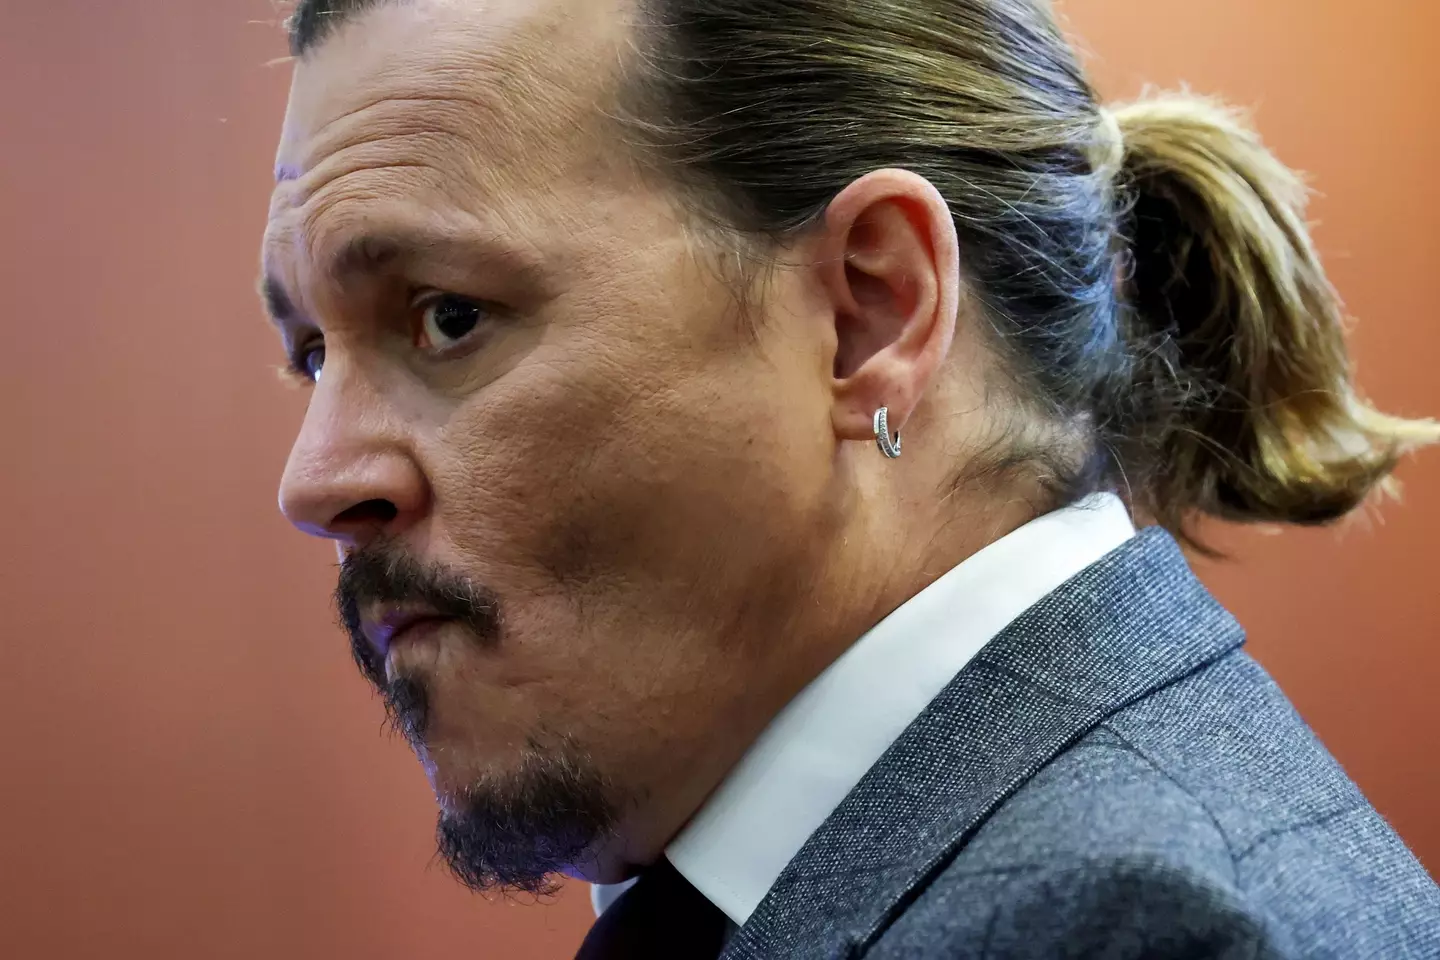 Experts have weighed in on the possible outcomes of the Johnny Depp Amber Heard libel trial.